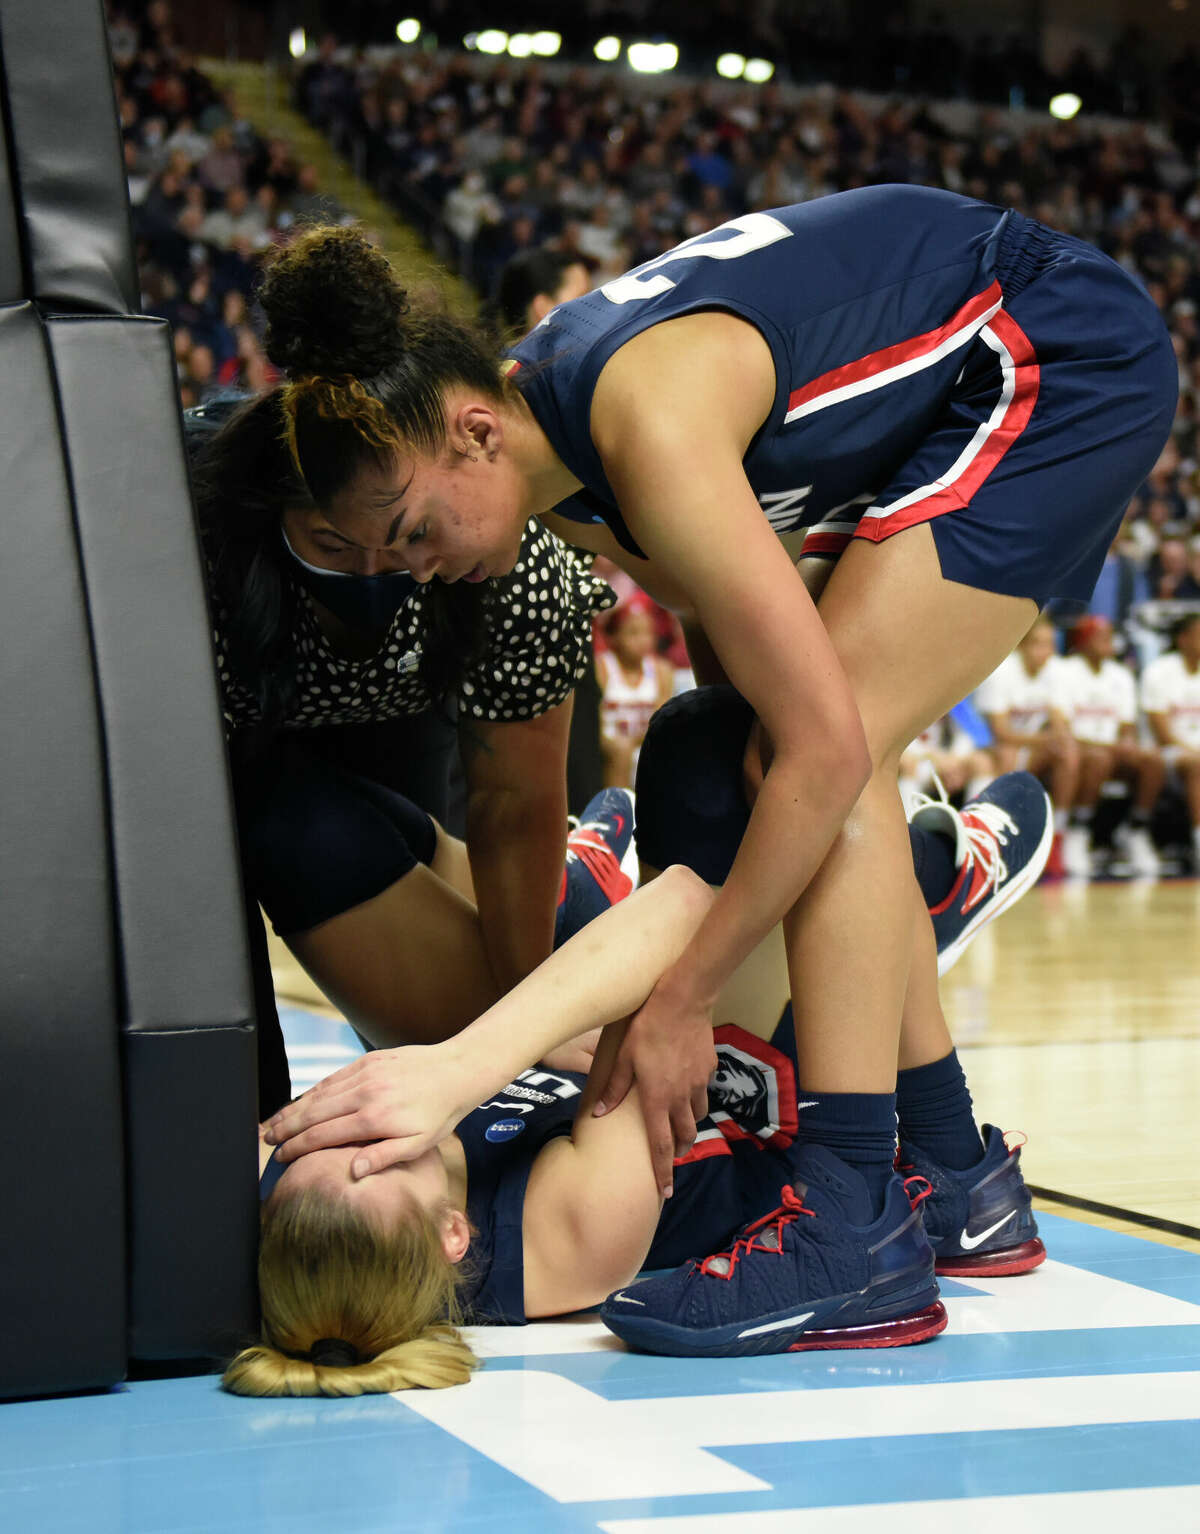 List of UConn women's basketball's injuries, ailments, absences